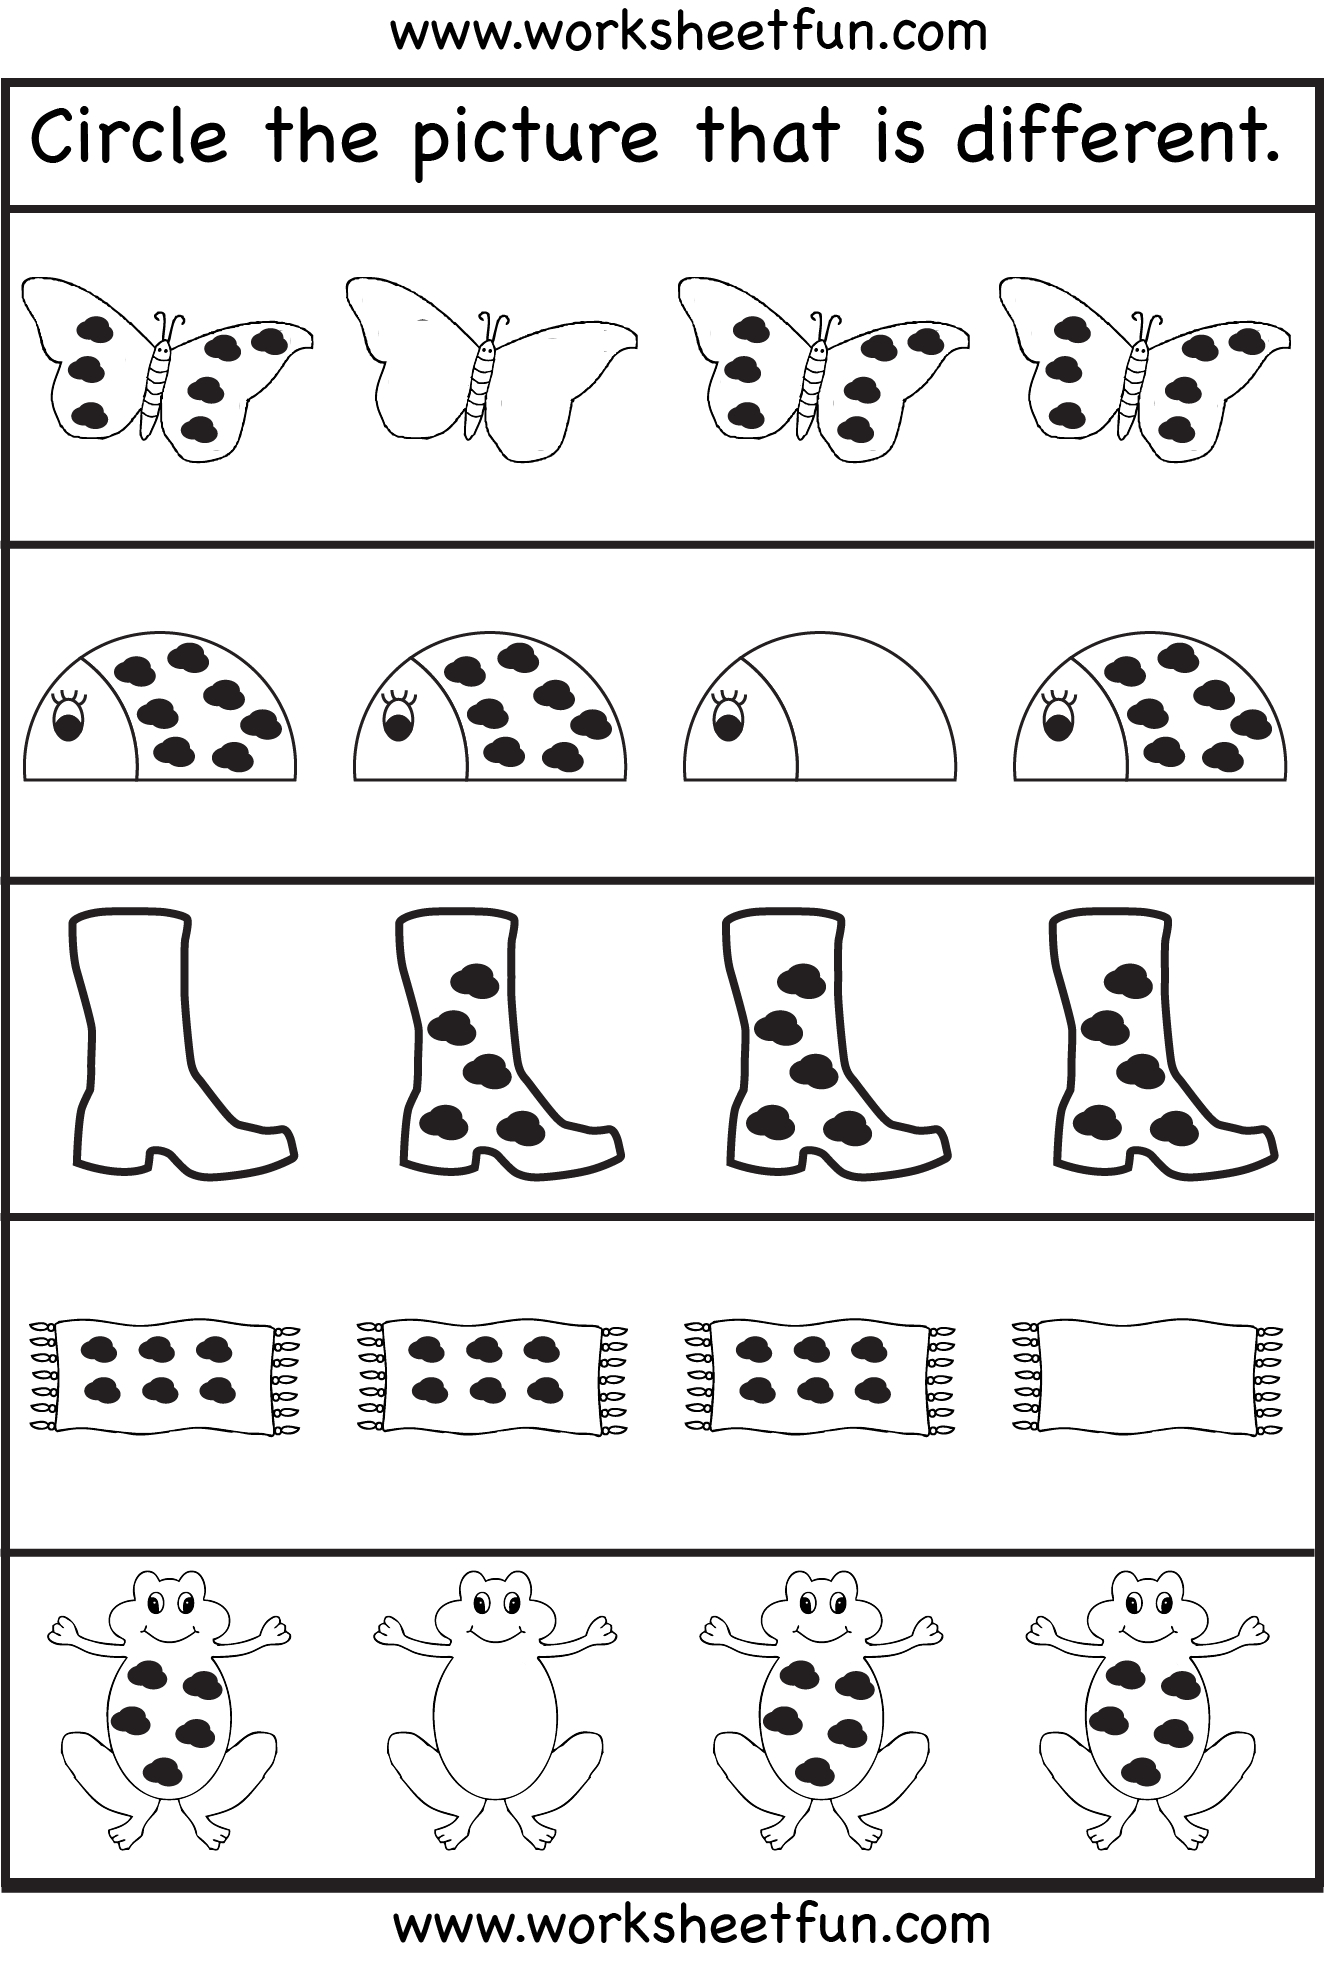 4-year-old-worksheets-printable-learning-sample-for-educations-db